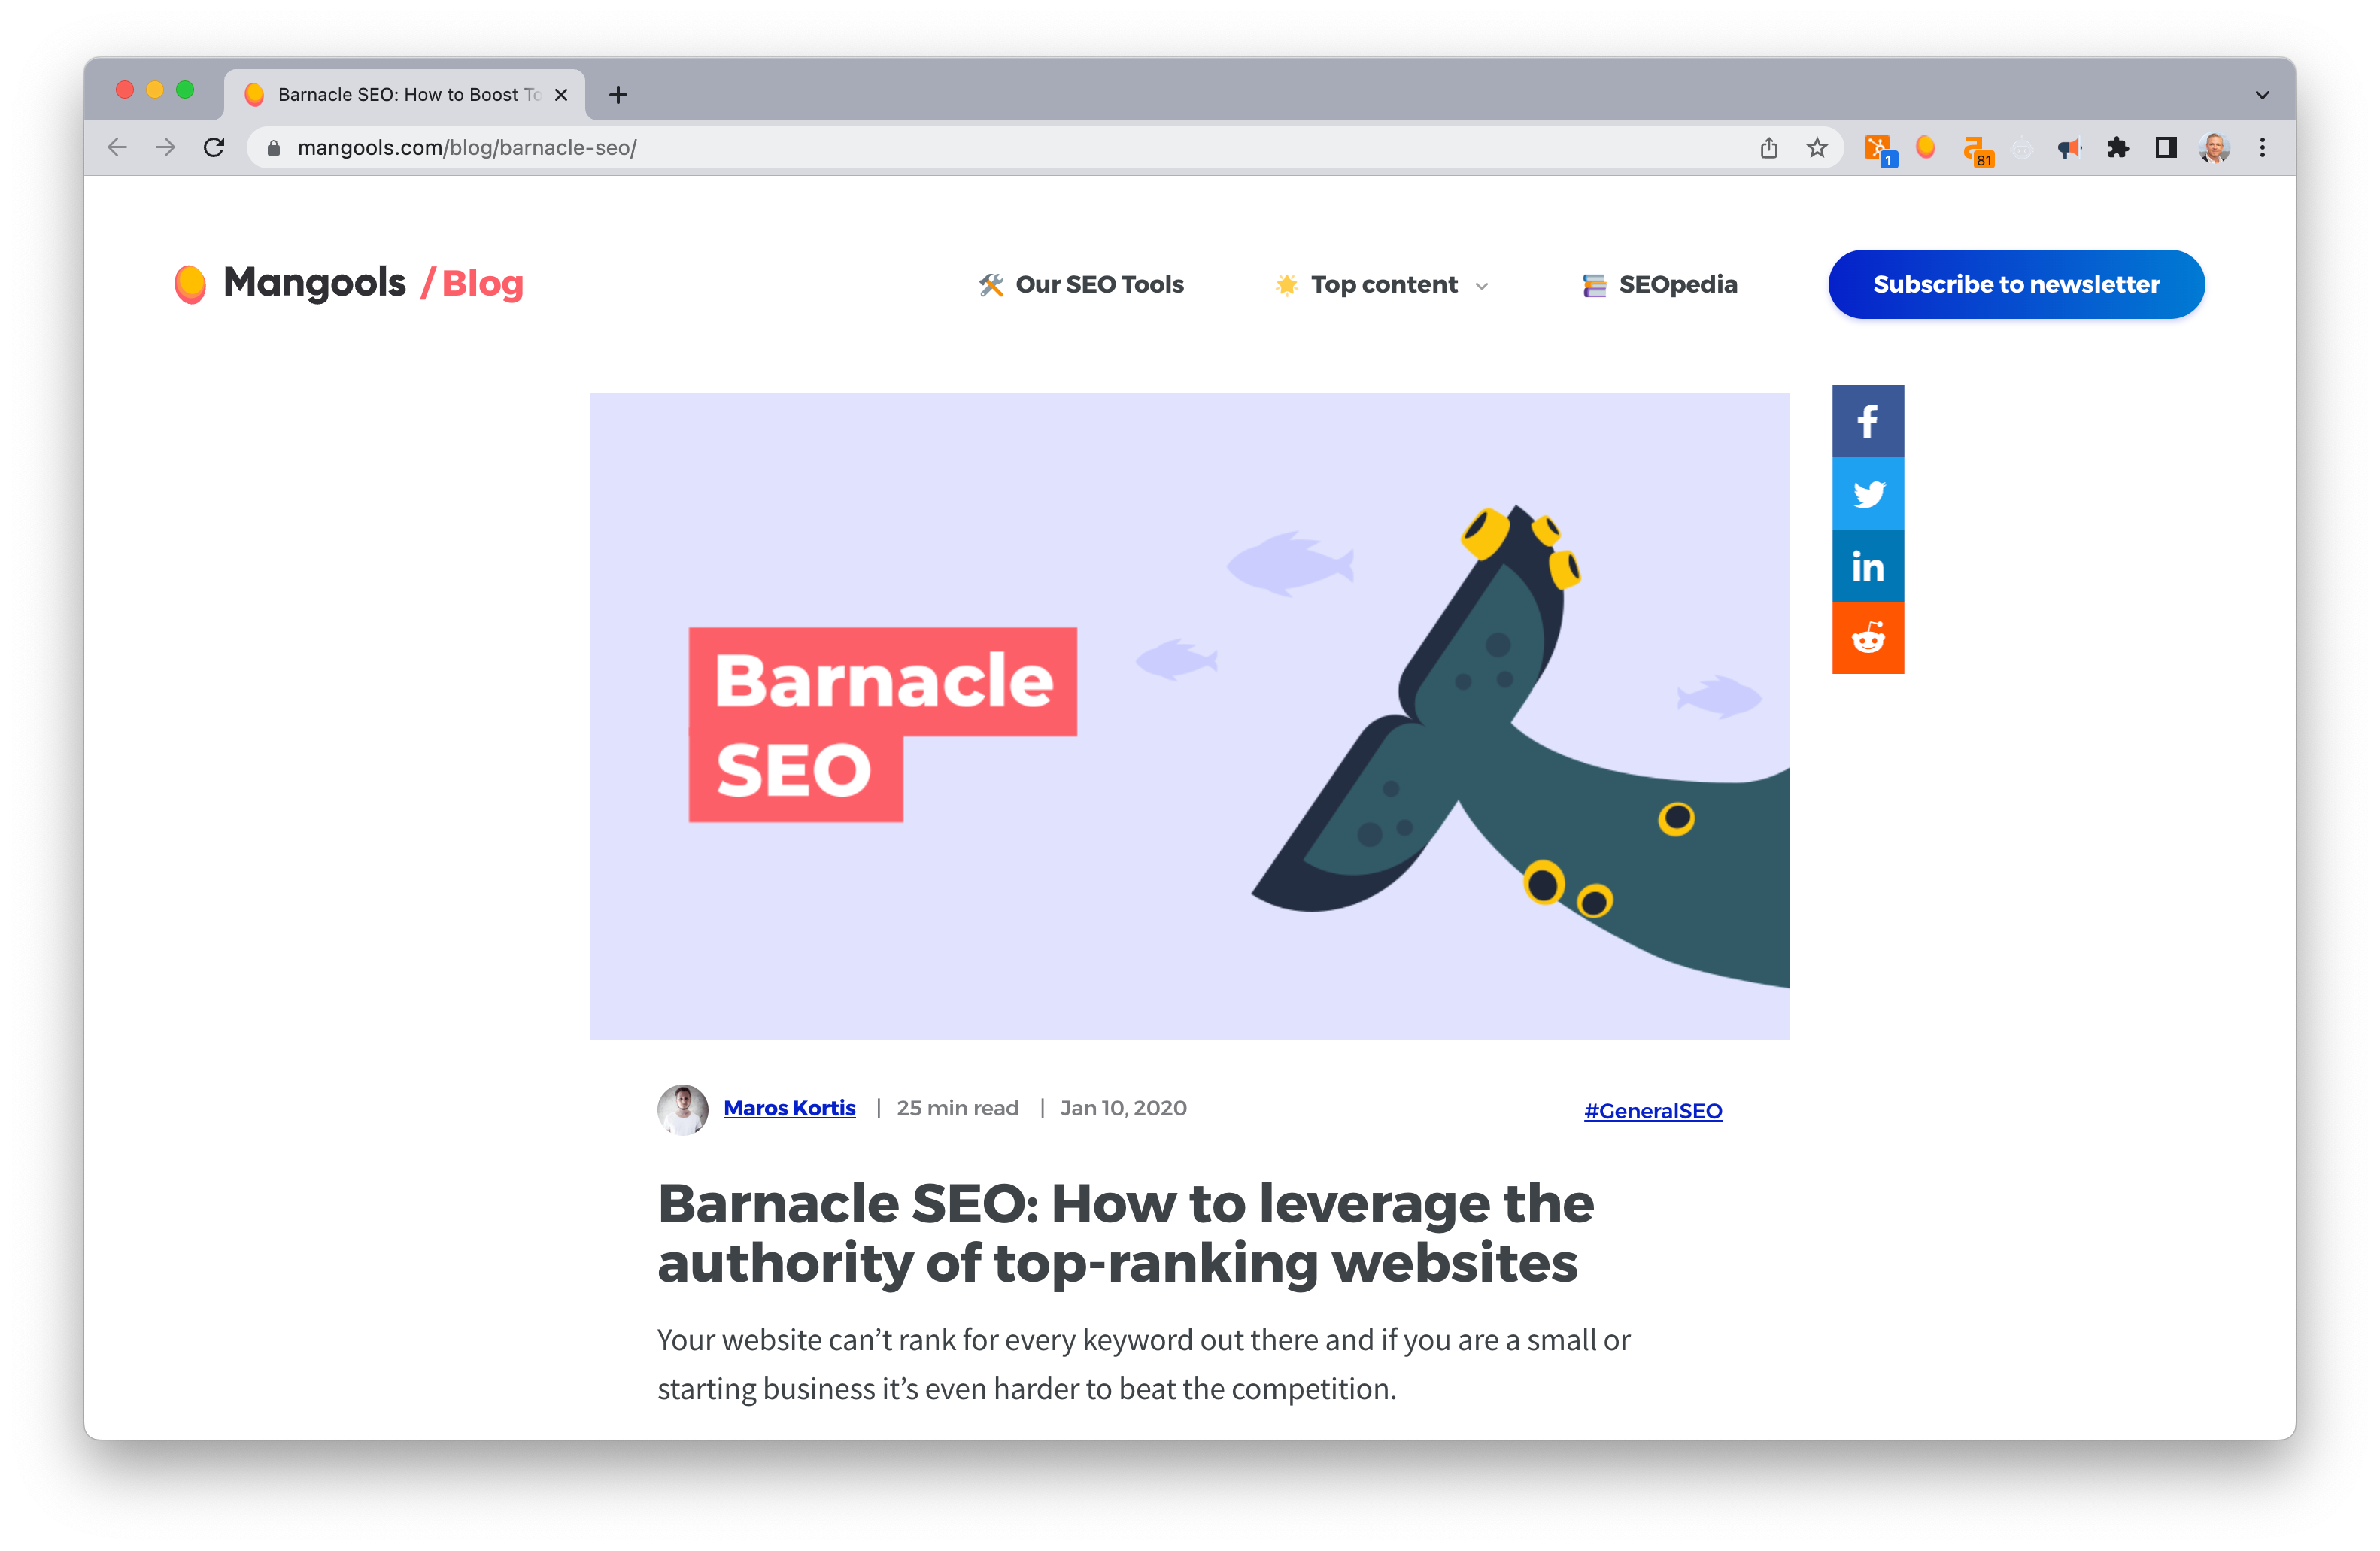 Screen Shot: Barnacle SEO: Boost your visibility by latching onto high-ranking websites